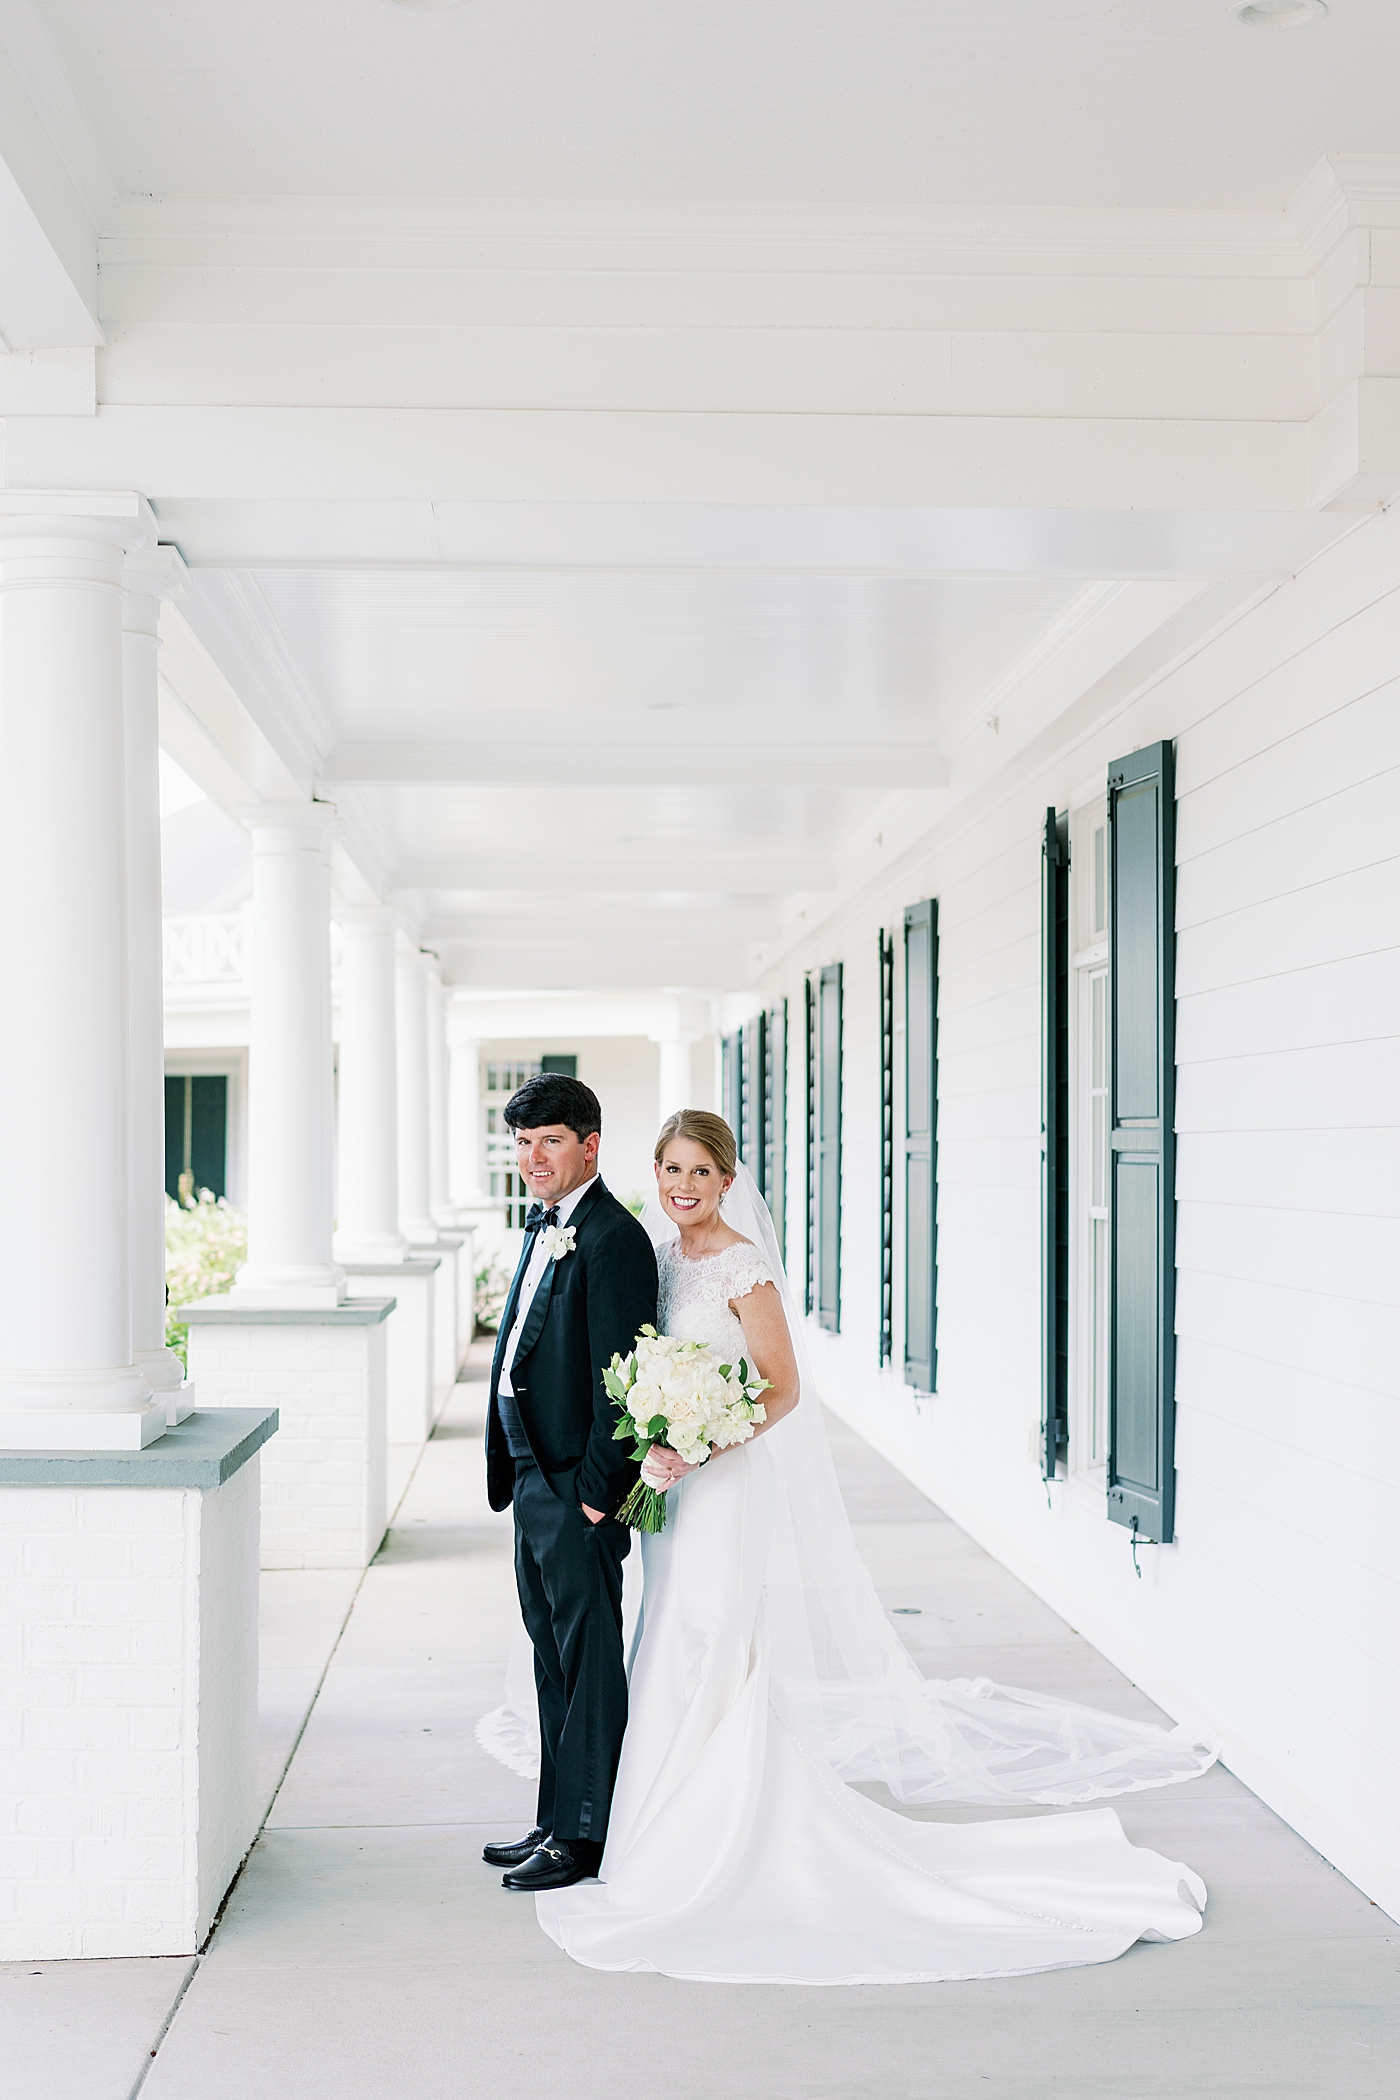 Bride and groom portraits on the porch | Image by Annie Laura Photo